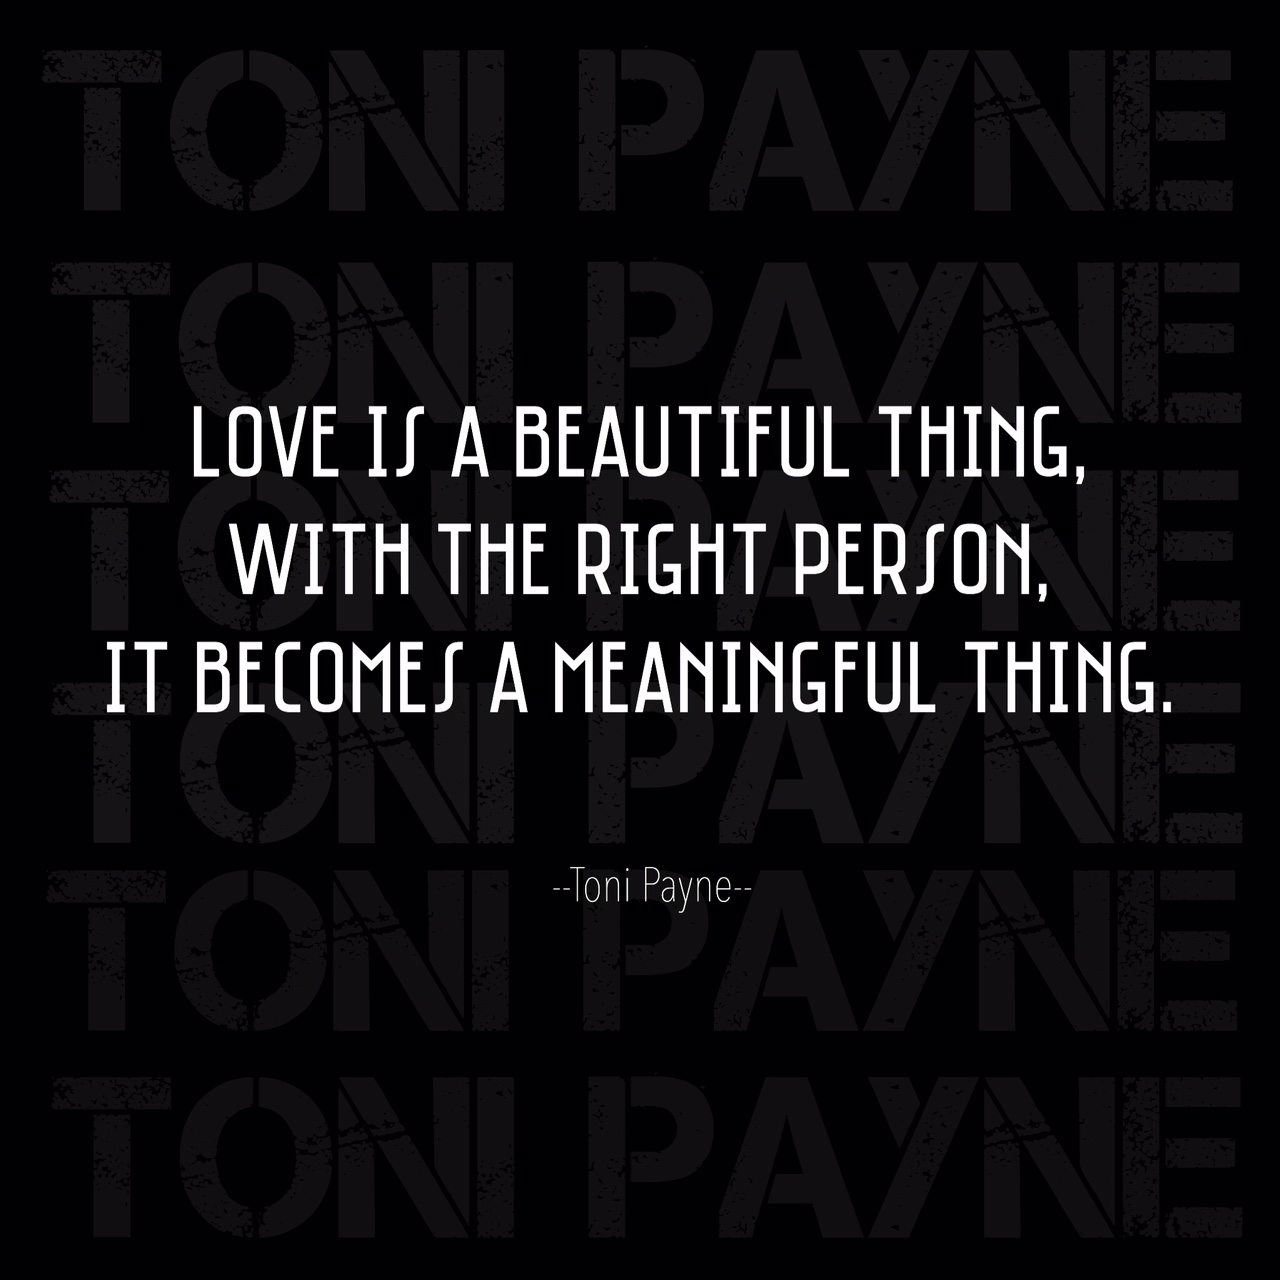 love is a beautiful thing quote